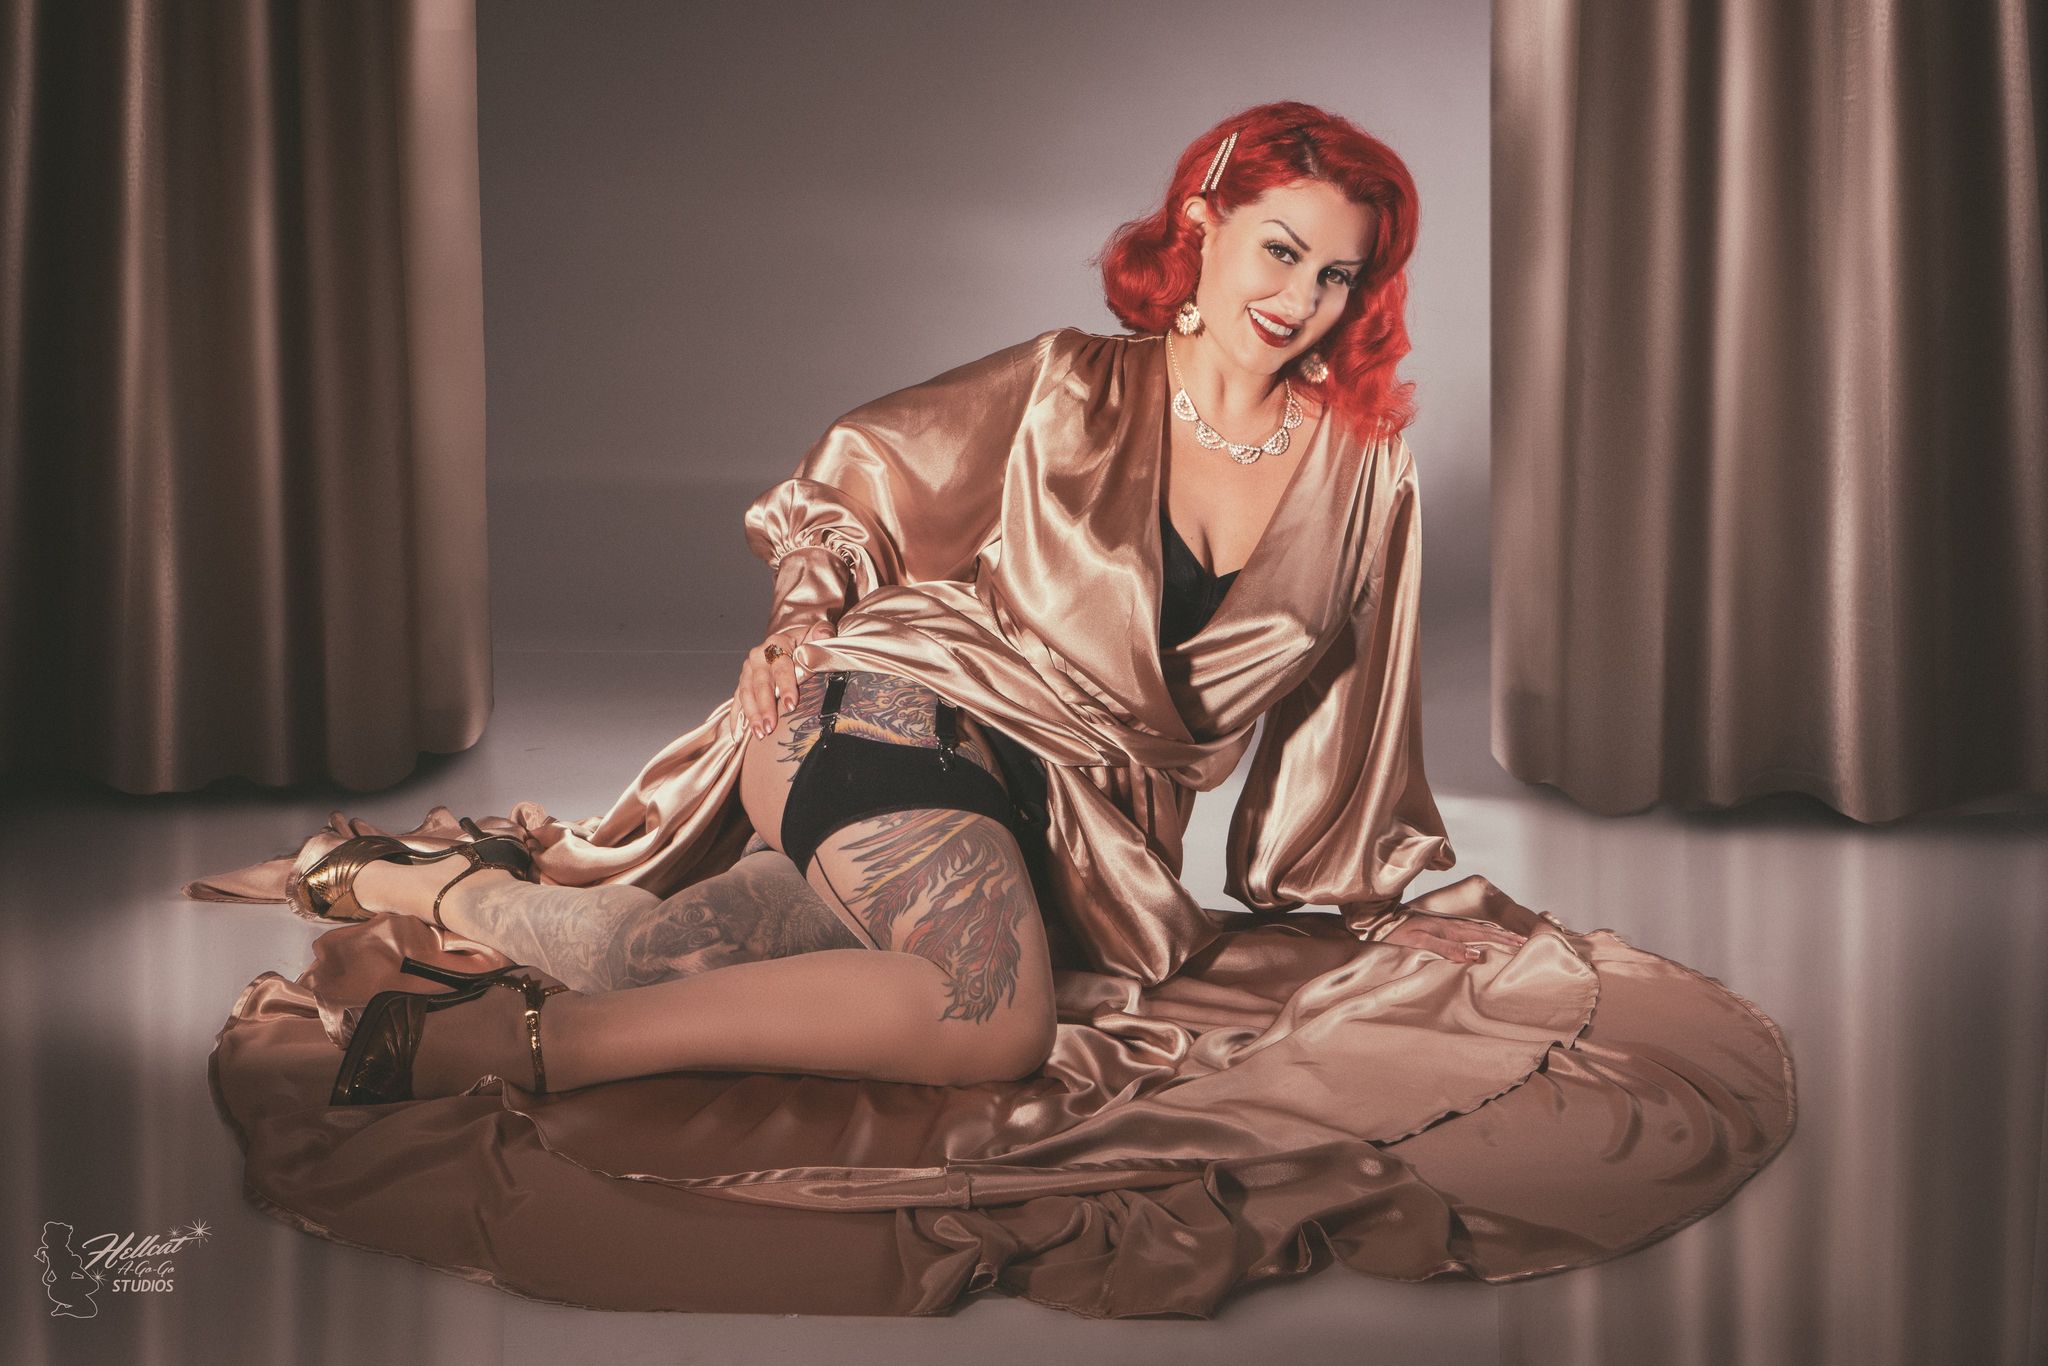 a woman with red hair sitting on the floor.